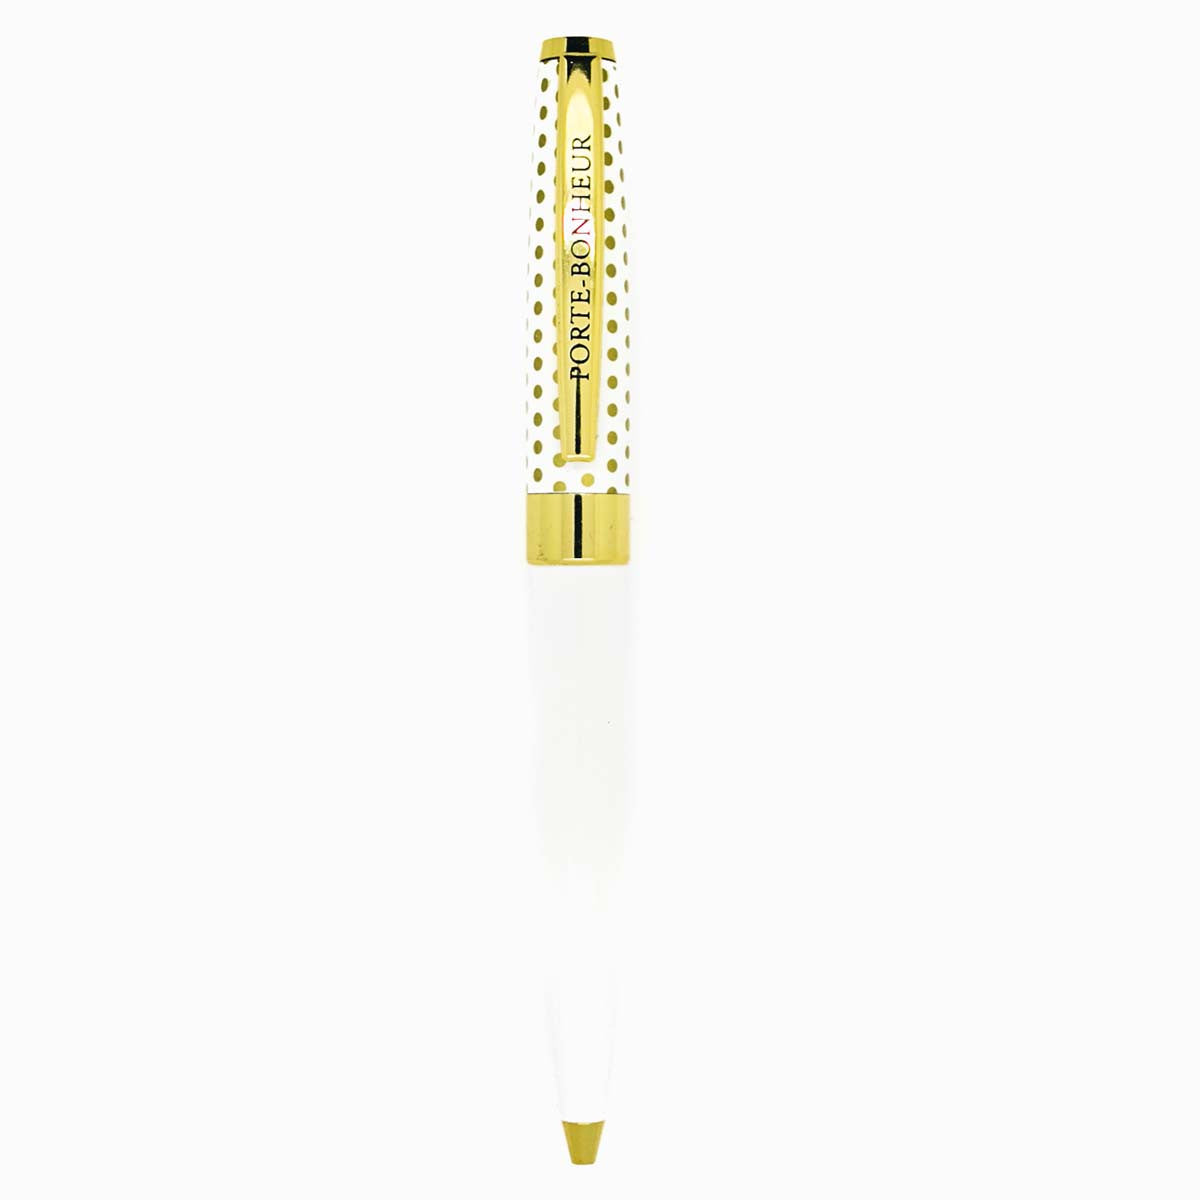 Personalized lucky charm pen